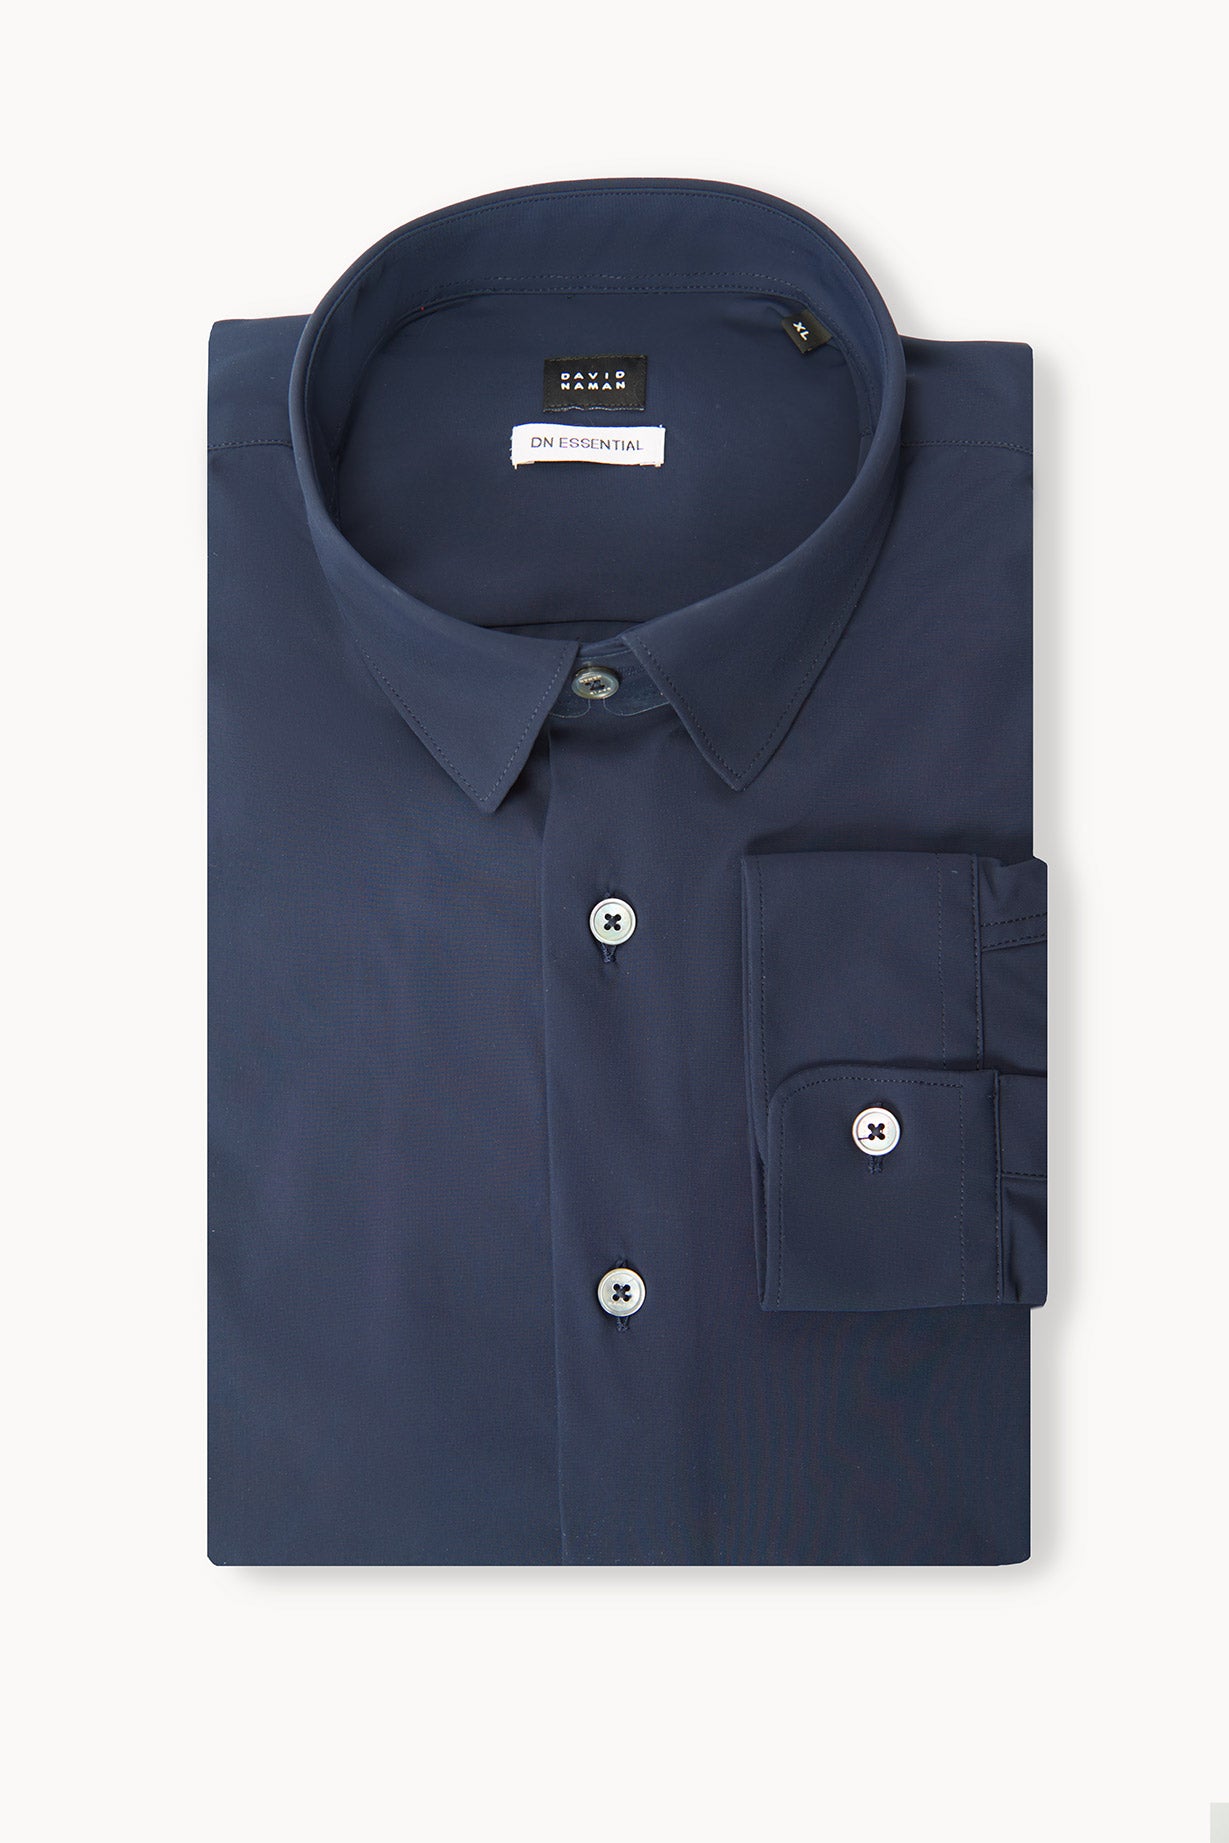 SHIRT IN TECHNICAL FABRIC - BLUE